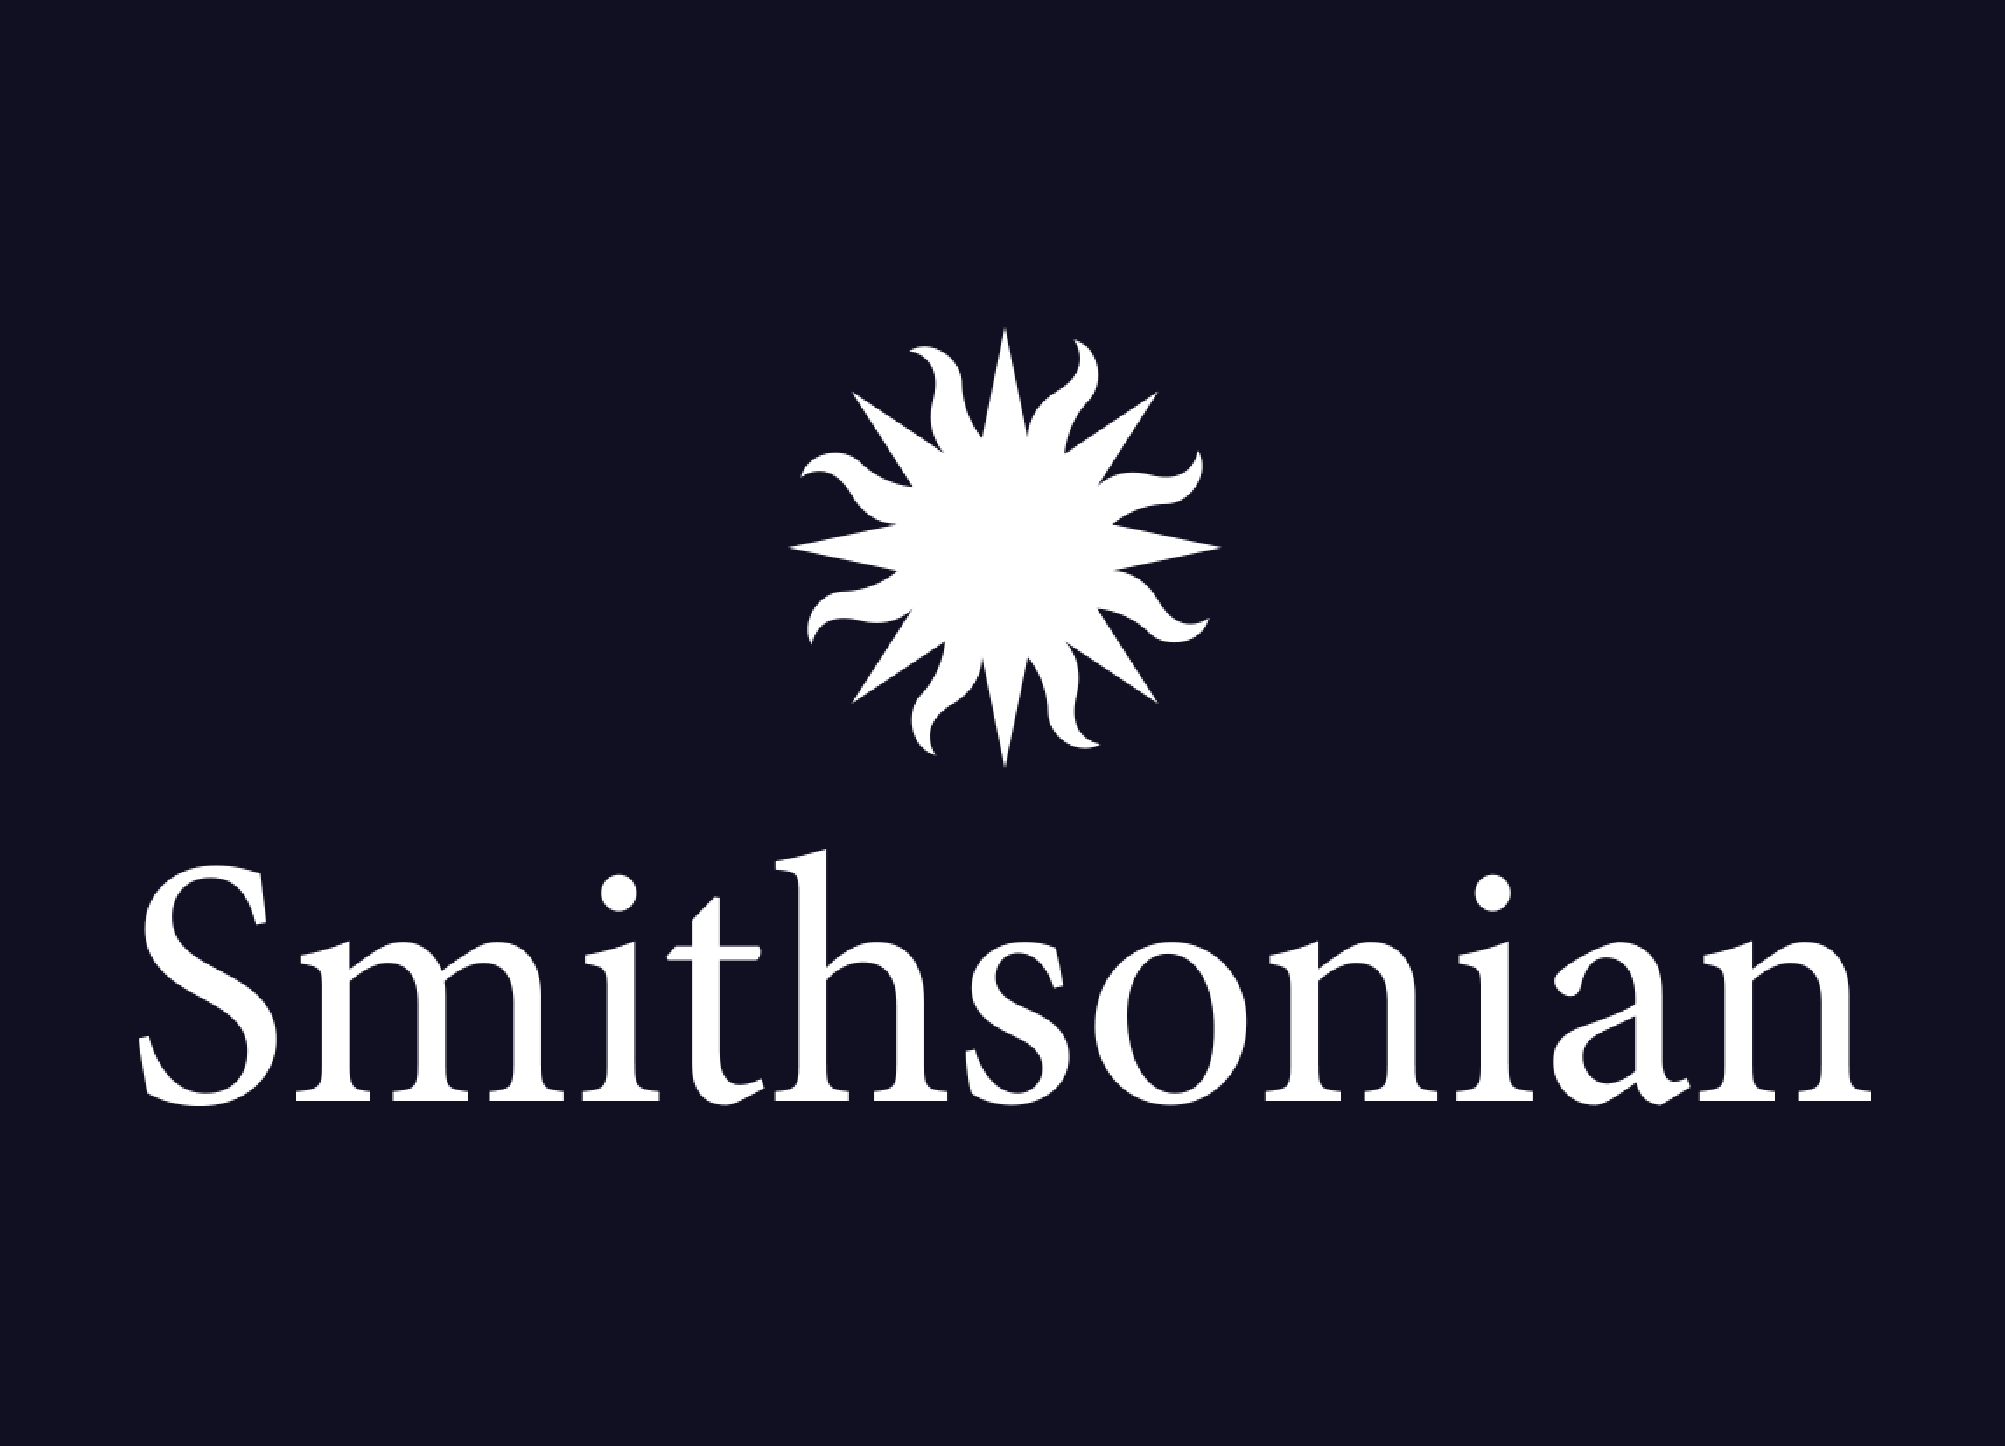 smithsonian.png